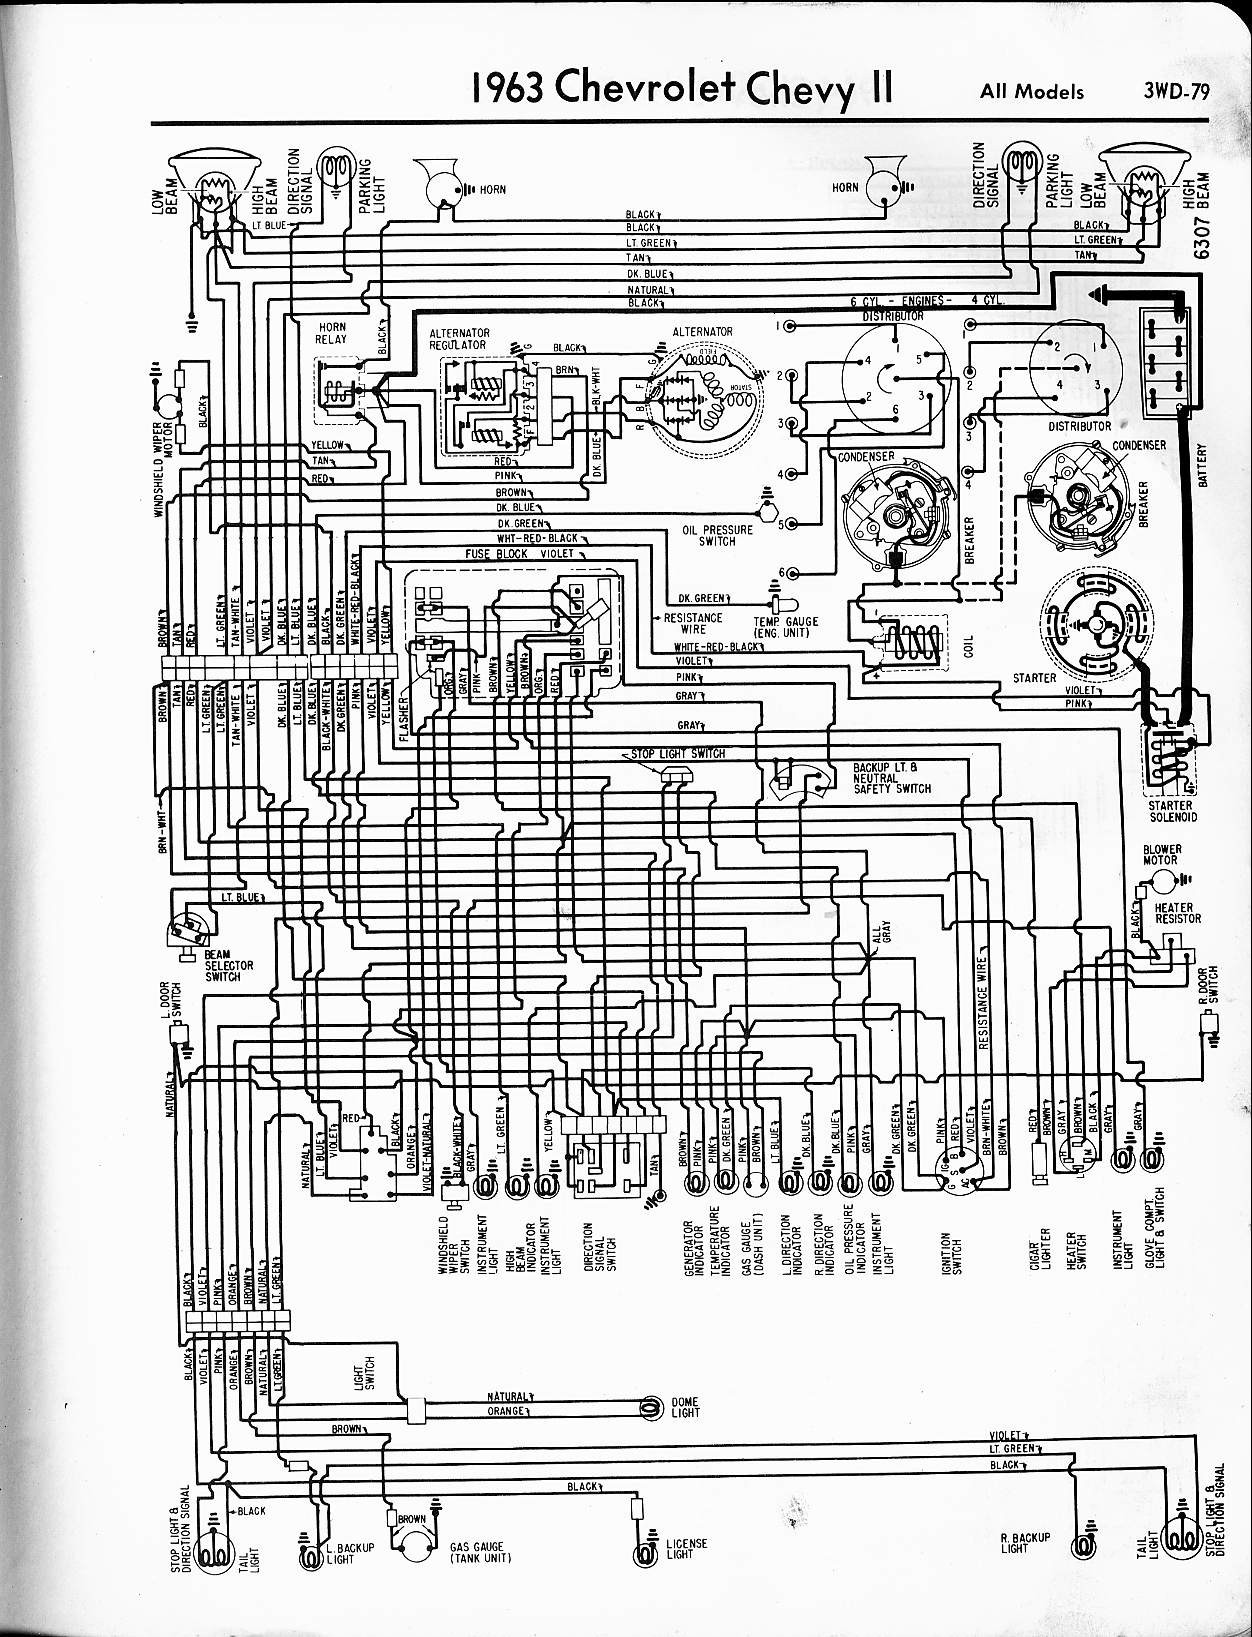 Wiring Diagram for Turn Signals Turn Signal Wiring Diagram Chevy Truck Shahsramblings Of Wiring Diagram for Turn Signals